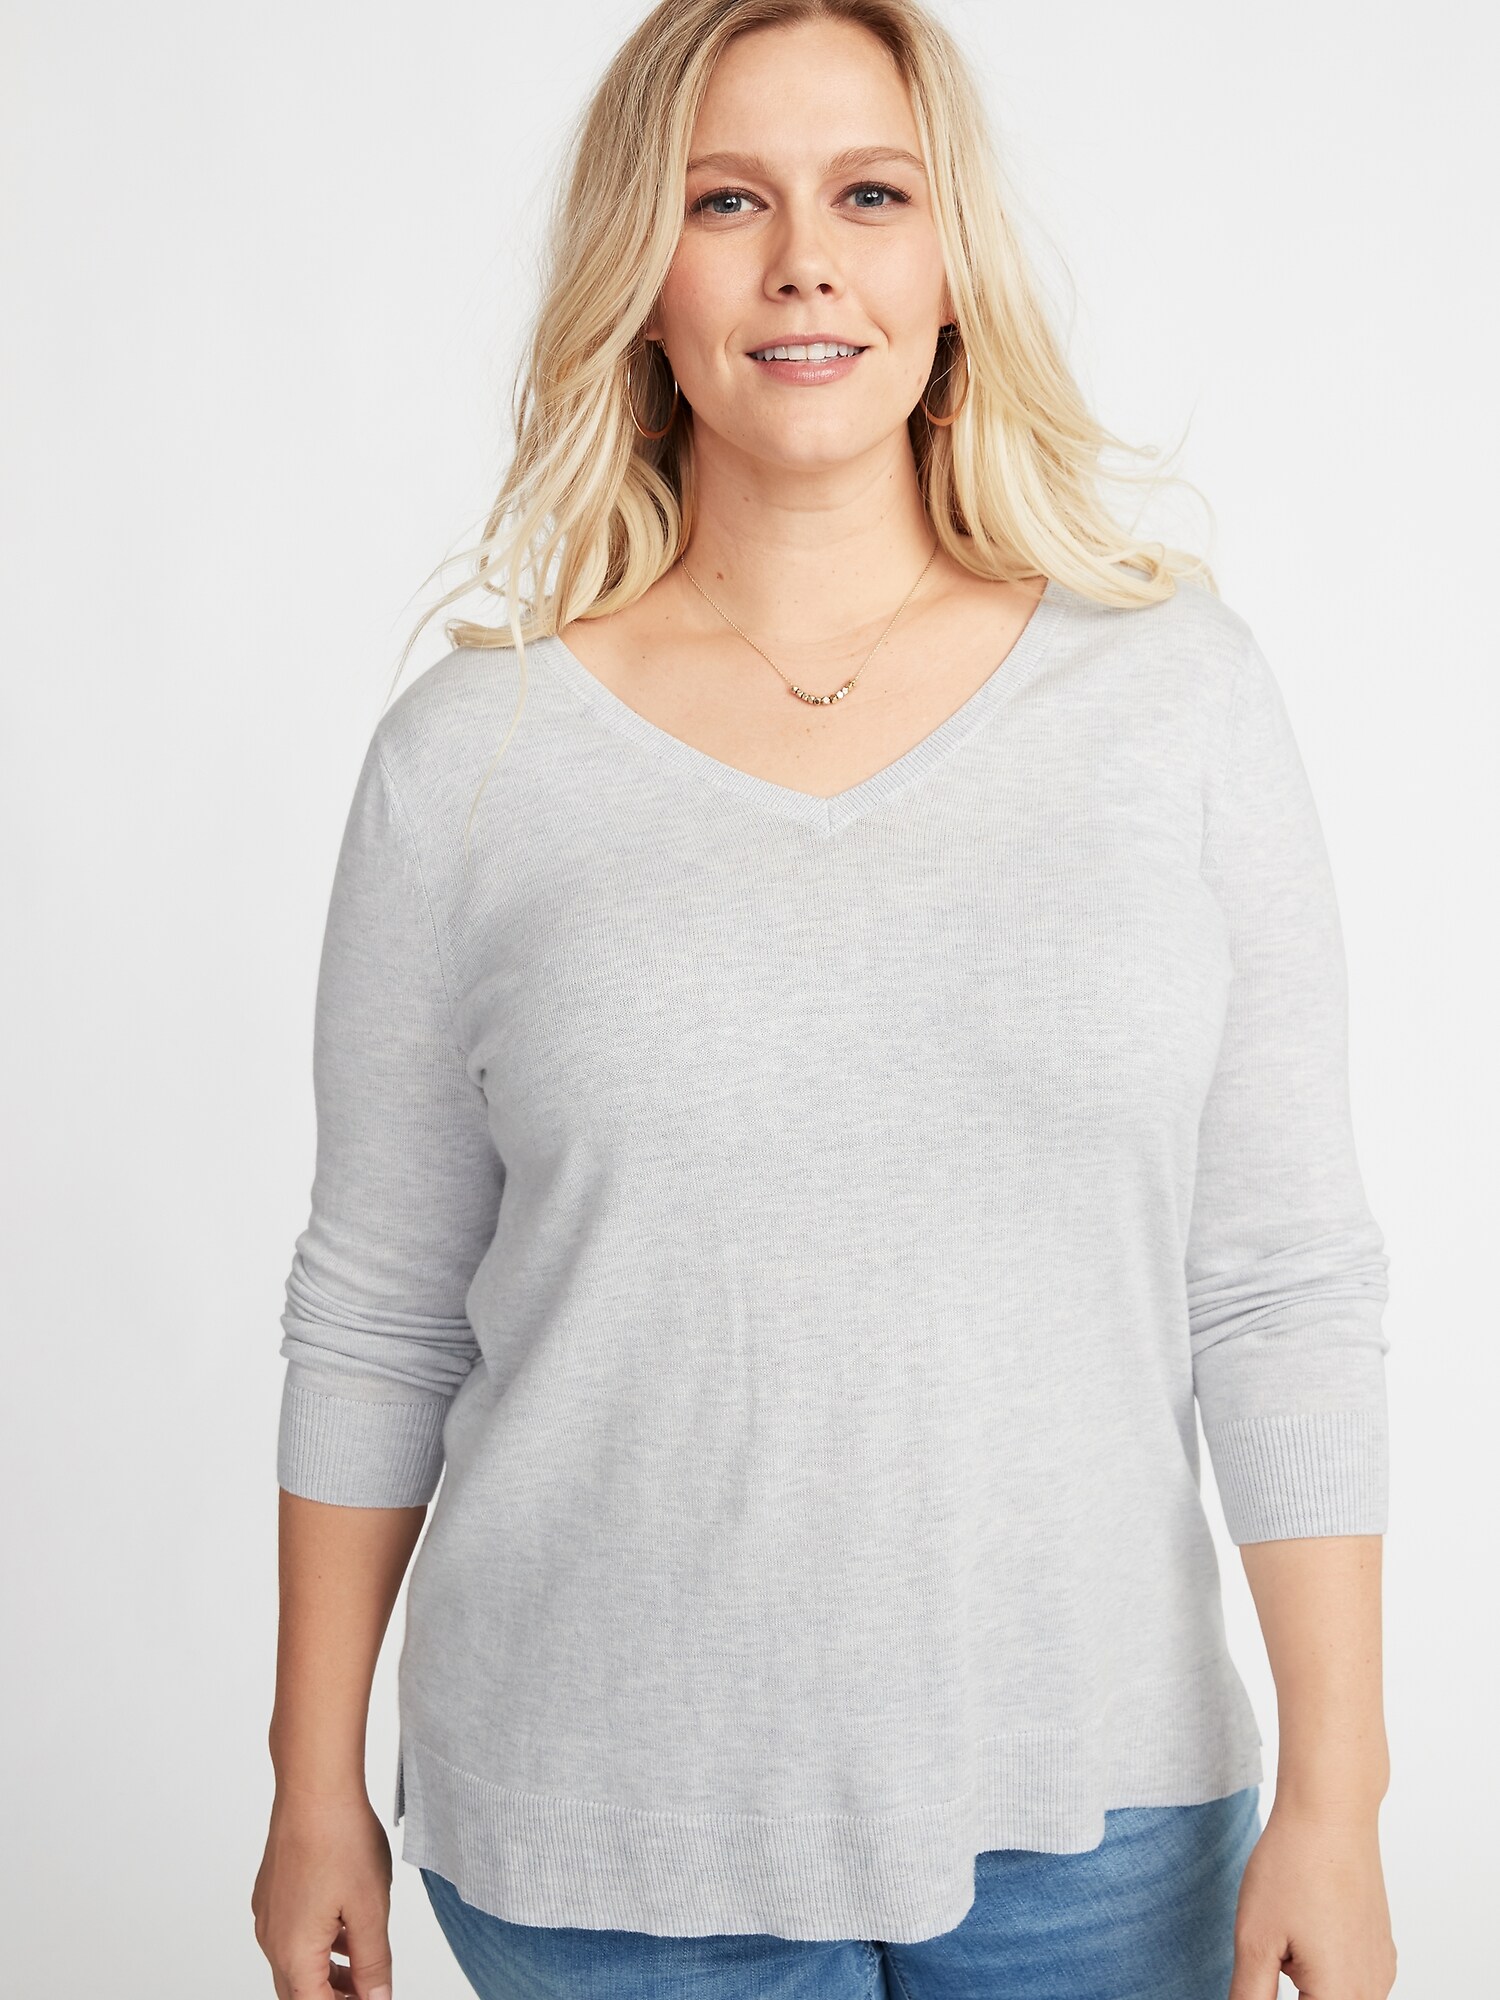 Classic Plus-Size V-Neck Sweater | Old Navy